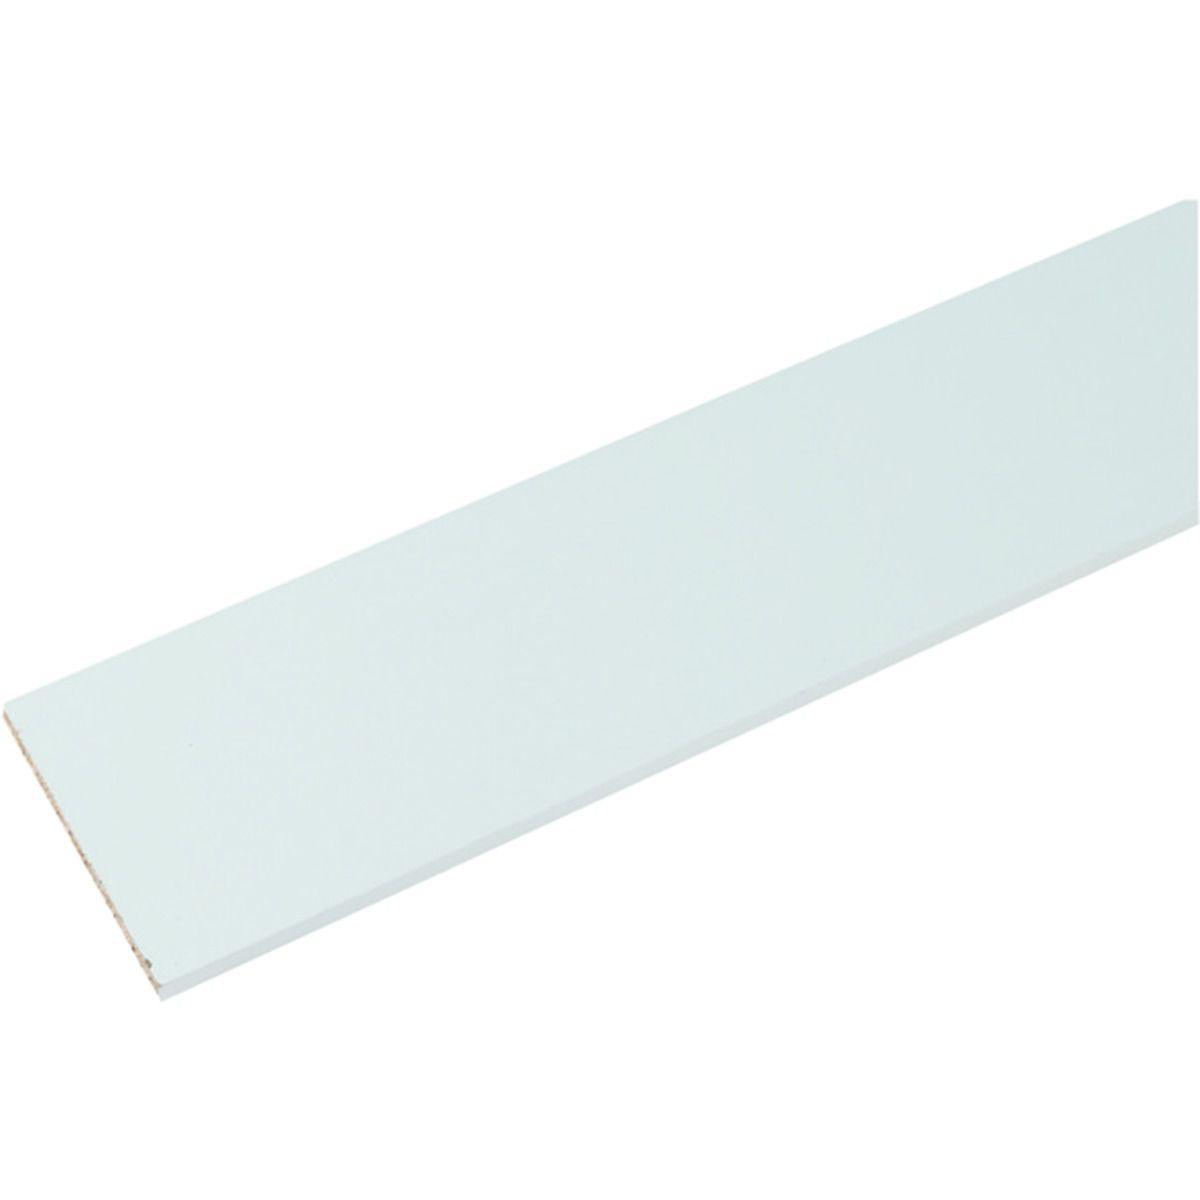 Image of Wickes MFC White Furniture Panel - 15mm x 600mm x 2400mm